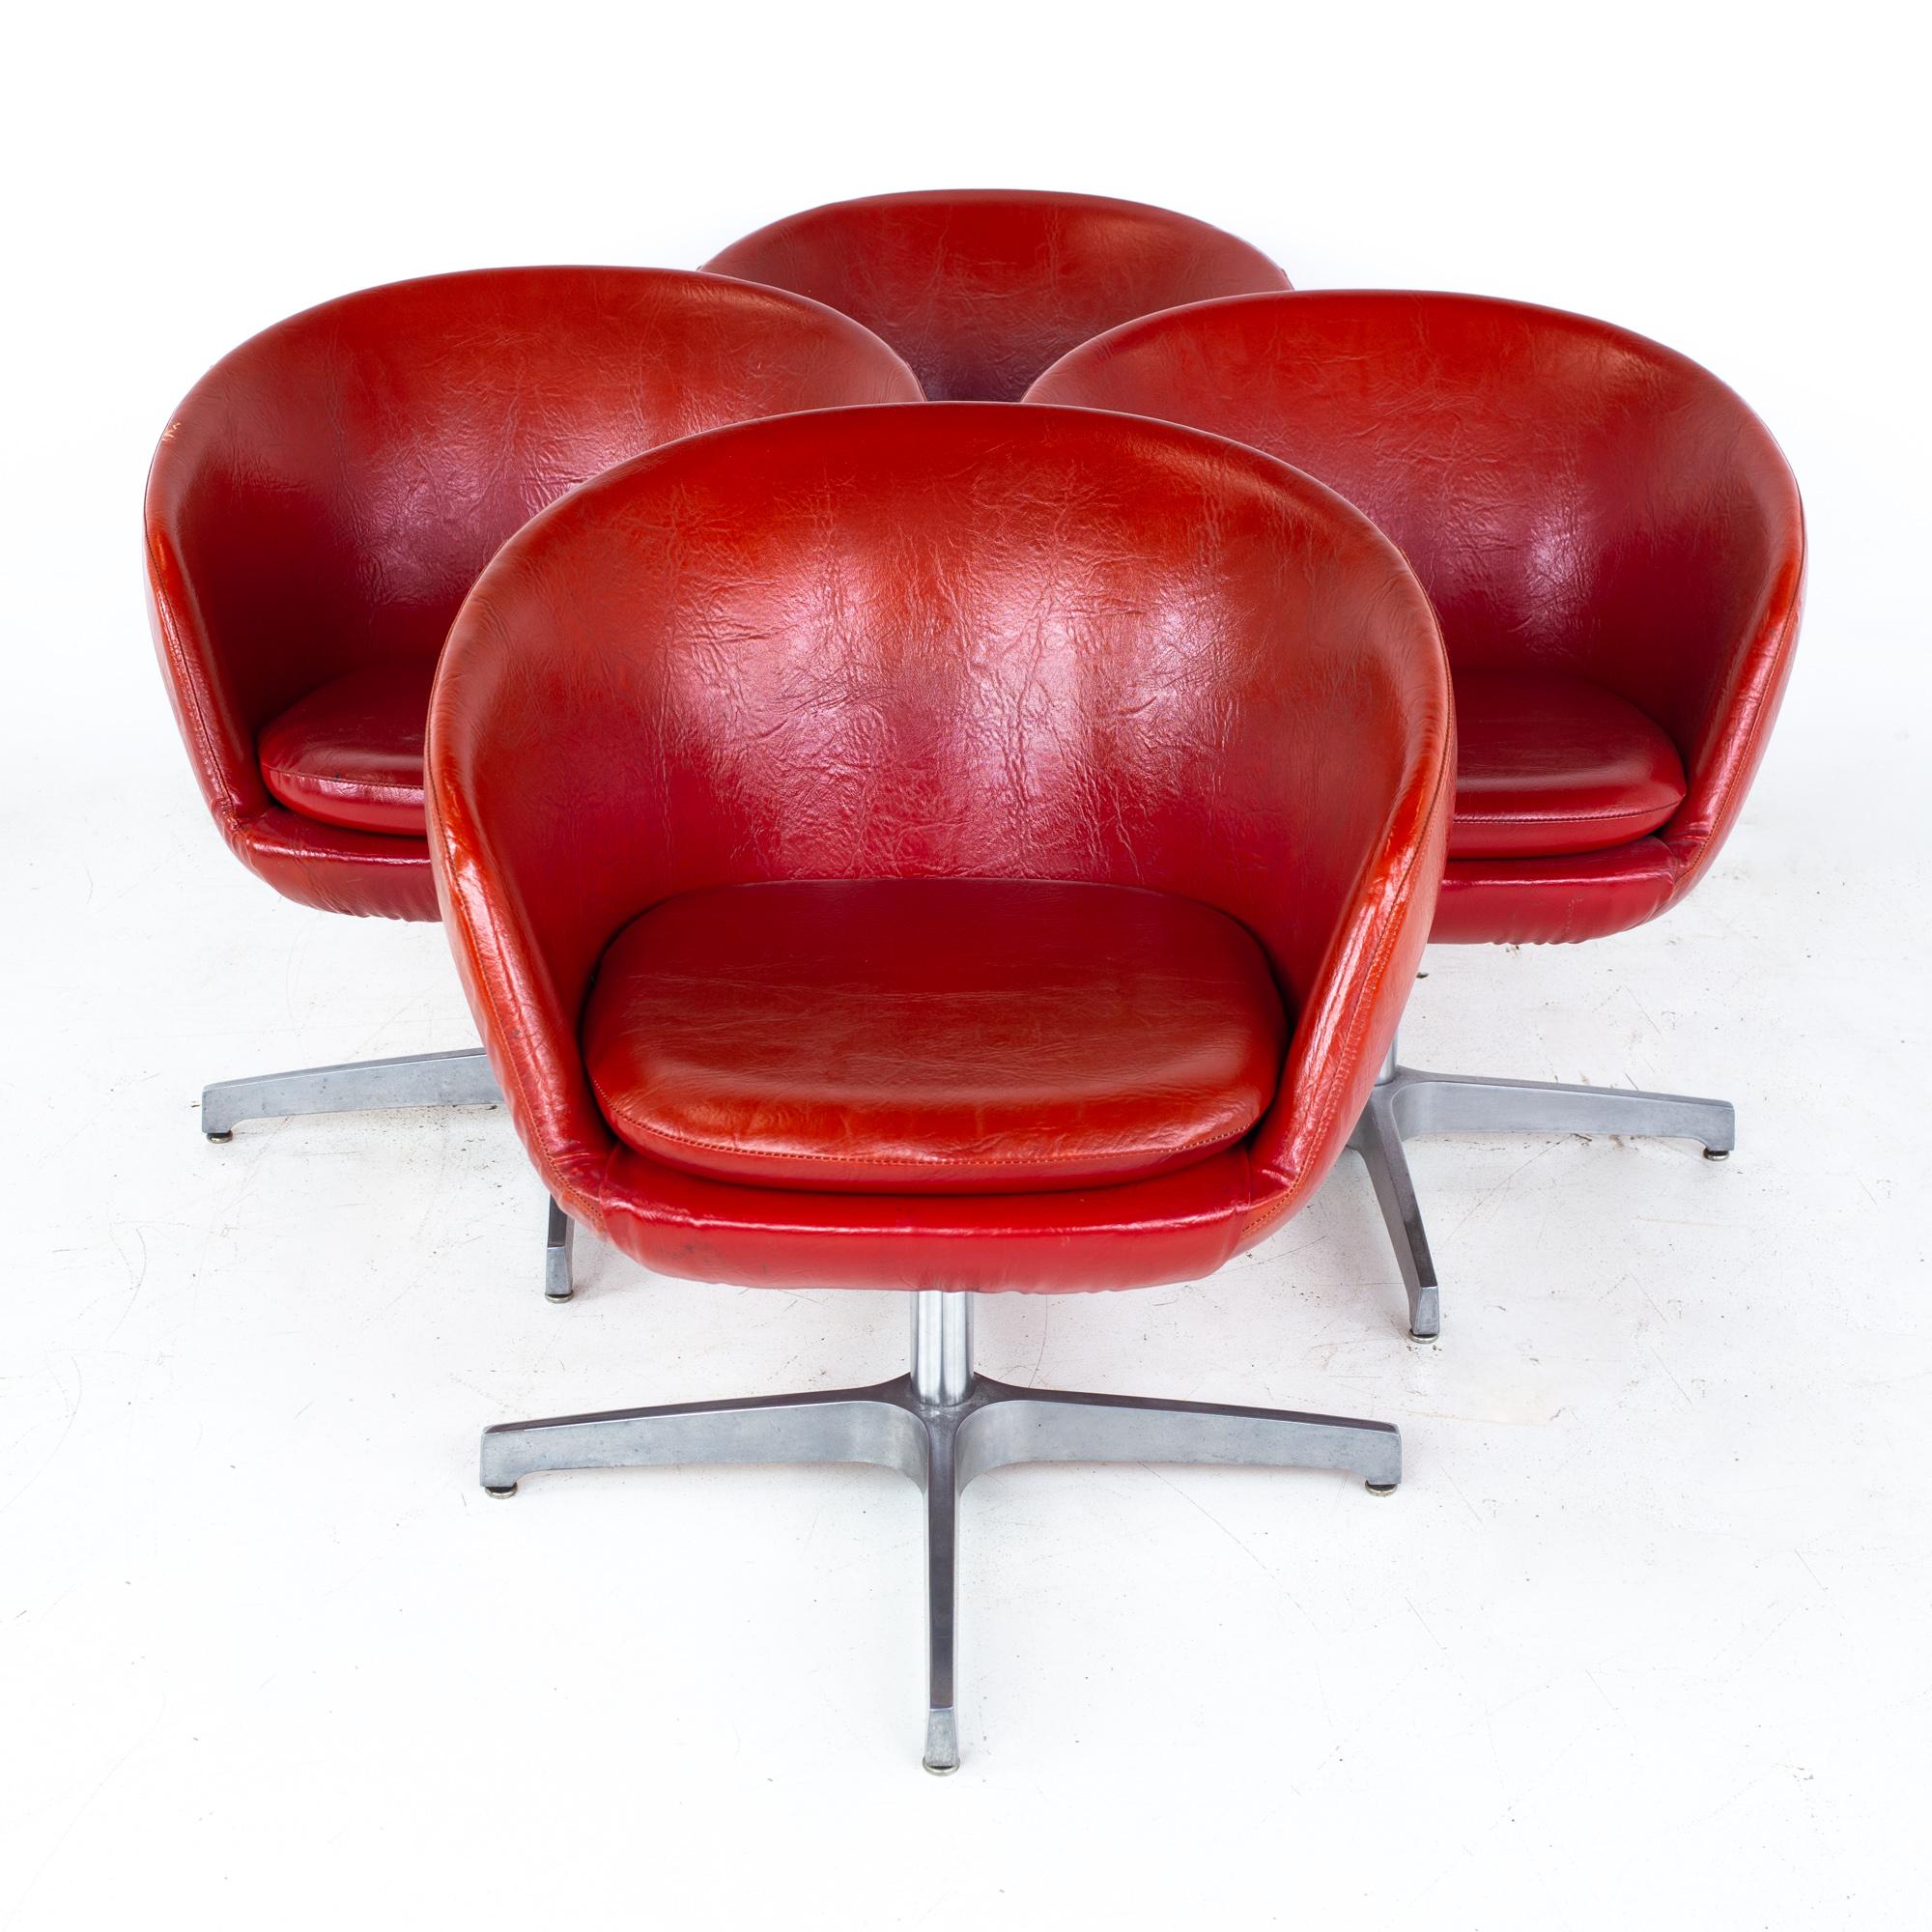 Mid century red Vinyl Pod occasional lounge chairs - Set of 4
Each chair measures: 26 wide x 25.75 deep x 28 high, with a seat height of 17.75 inches and arm/chair clearance of 22 inches 

All pieces of furniture can be had in what we call